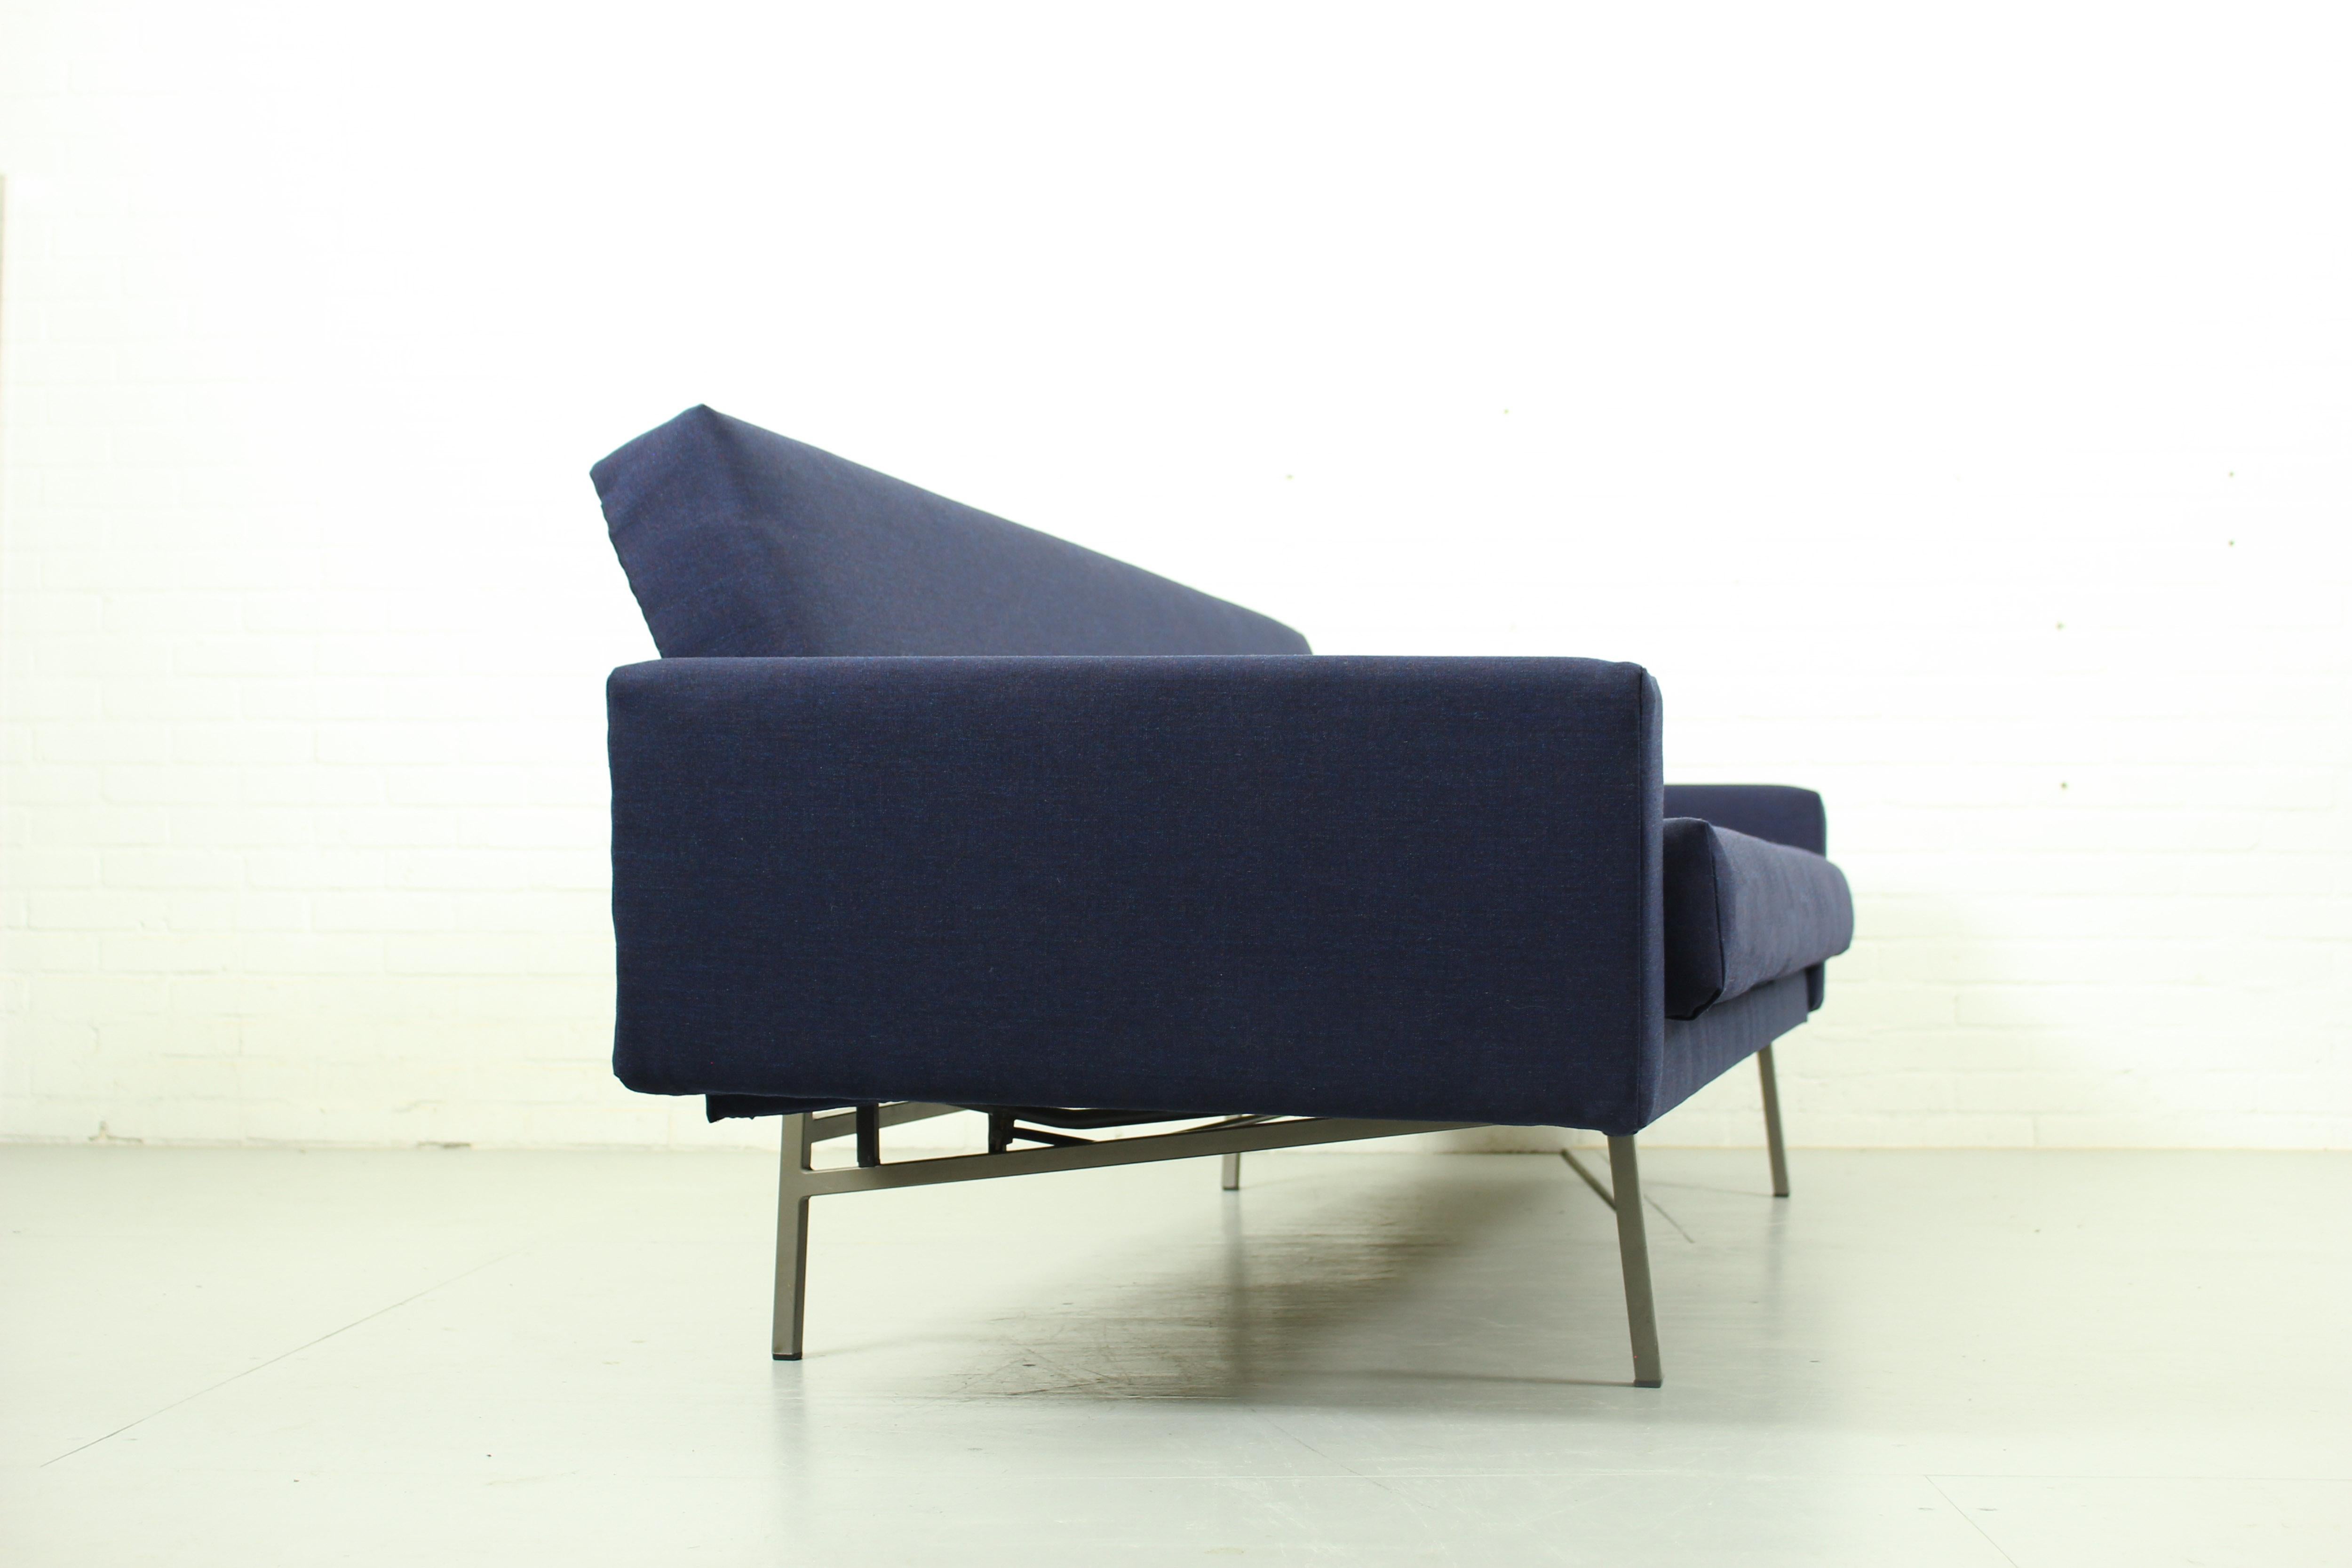 Sofa/ Daybed by Rob Parry for Gelderland, Netherlands, 1950s For Sale 4